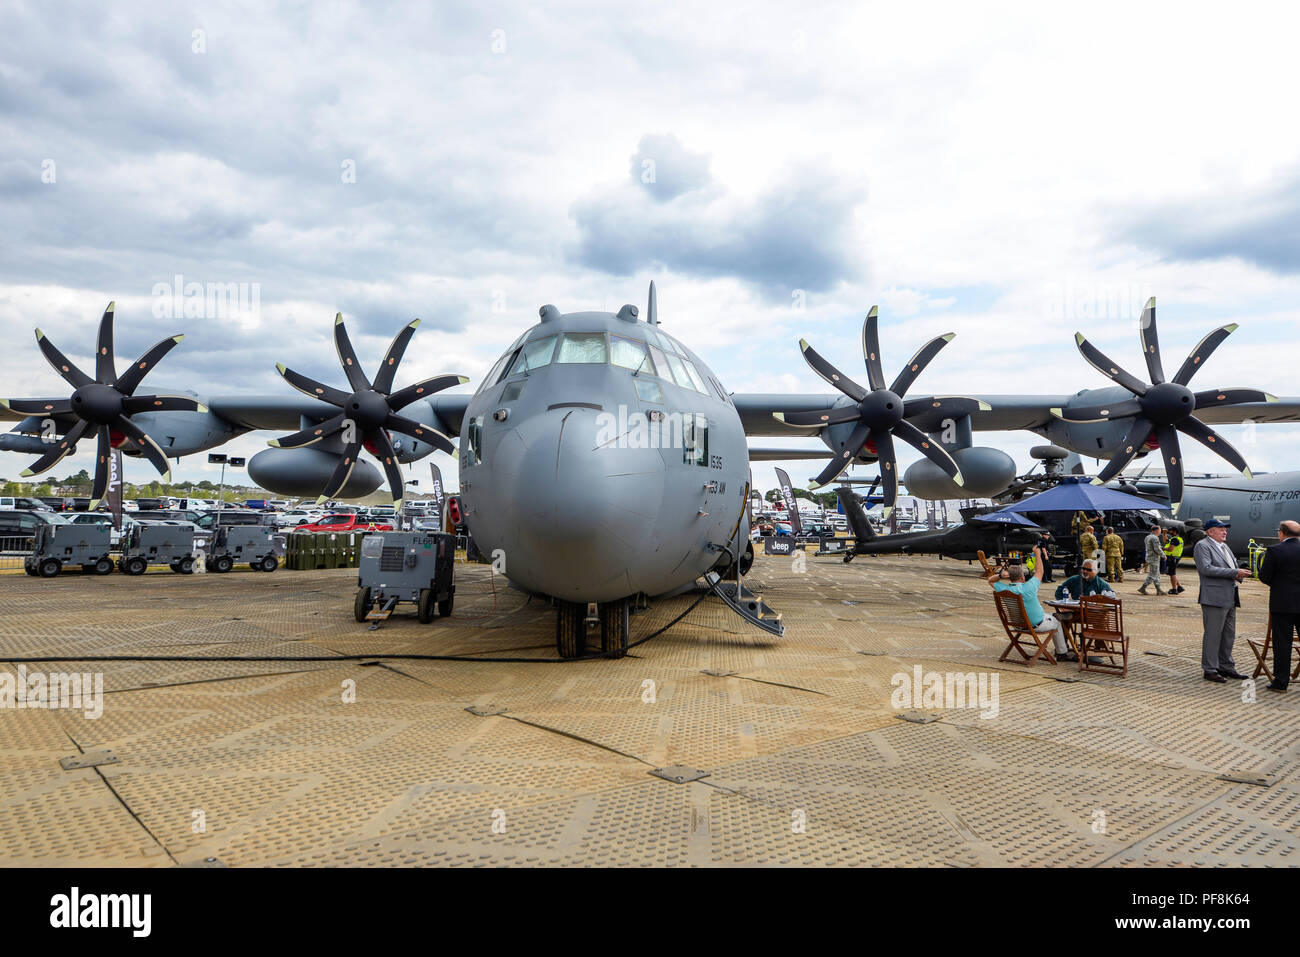 Lockheed C-130H with eight blade propeller and RR T56 engines at the Farnborough International Airshow FIA, aviation, aerospace trade show 2018 Stock Photo